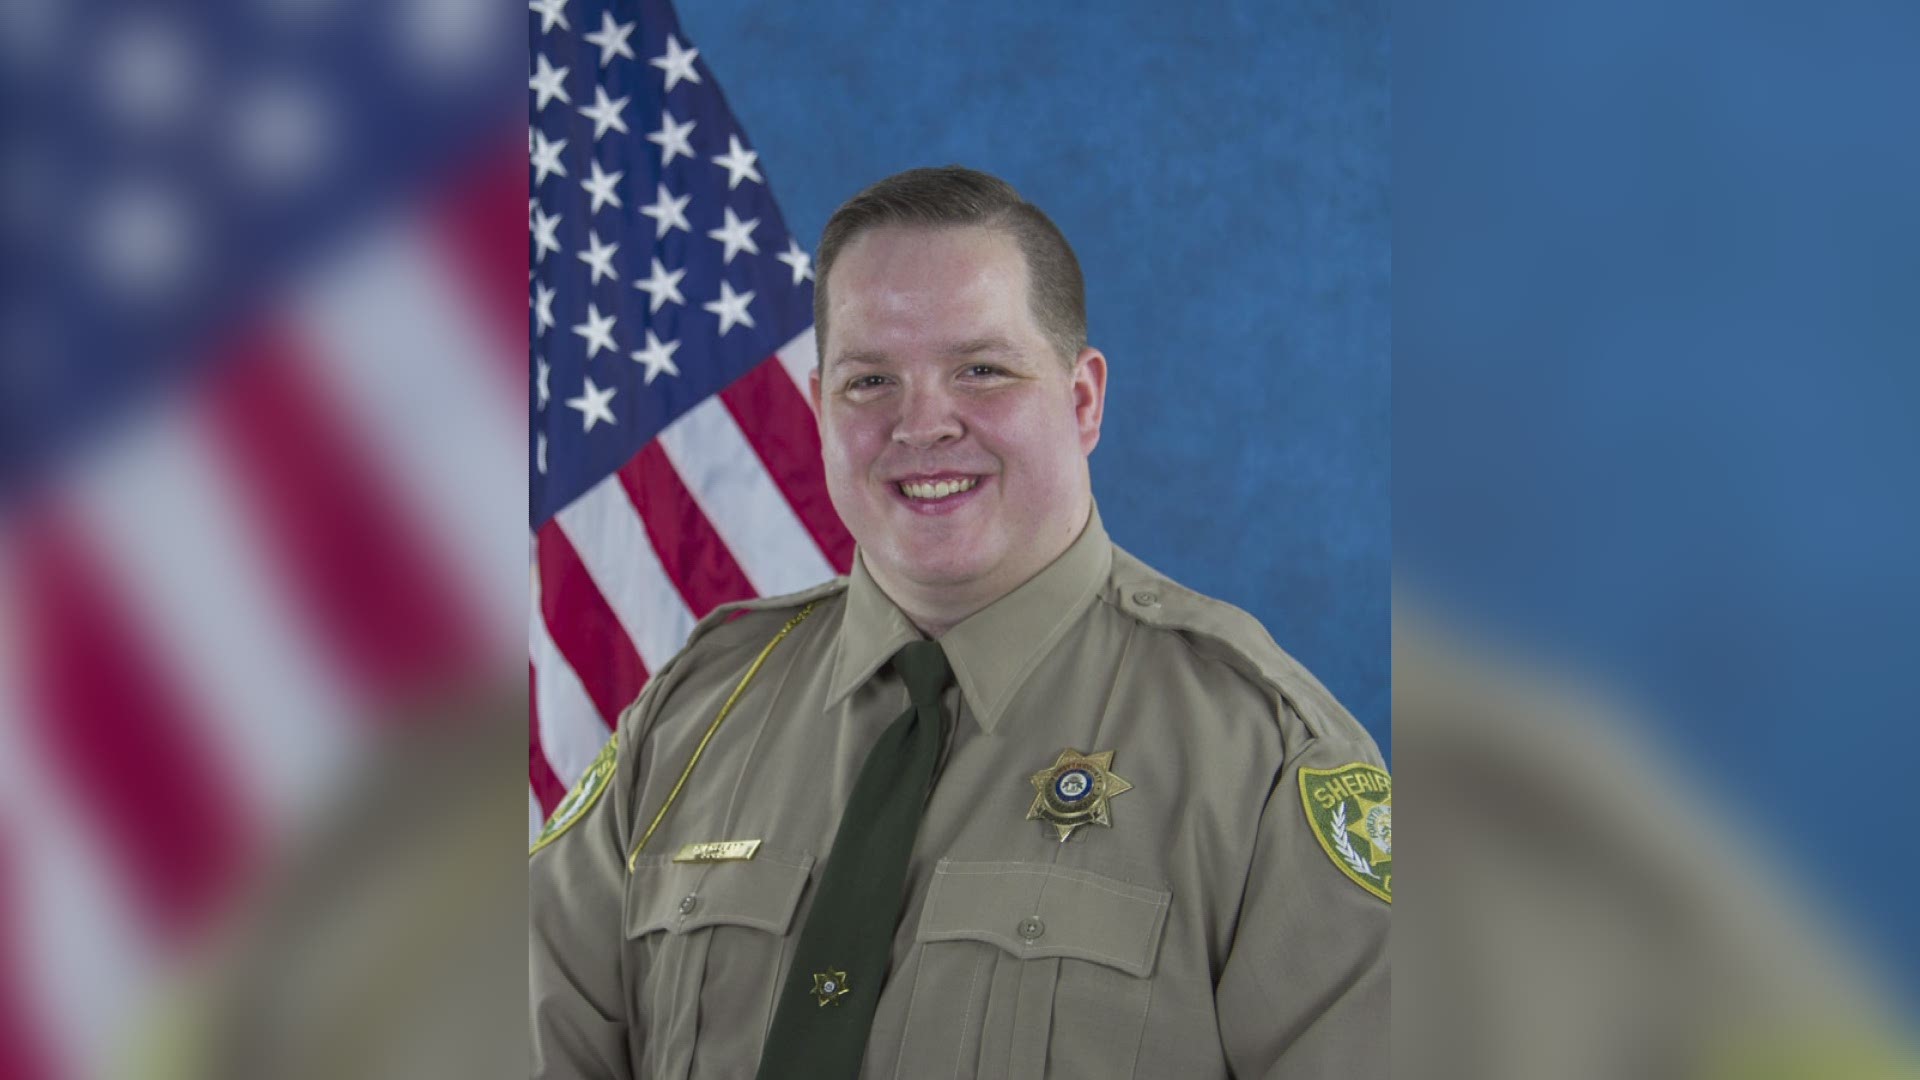 Sheriff Ron Freeman spoke about Spencer Englett, the deputy who died during his first day of training.